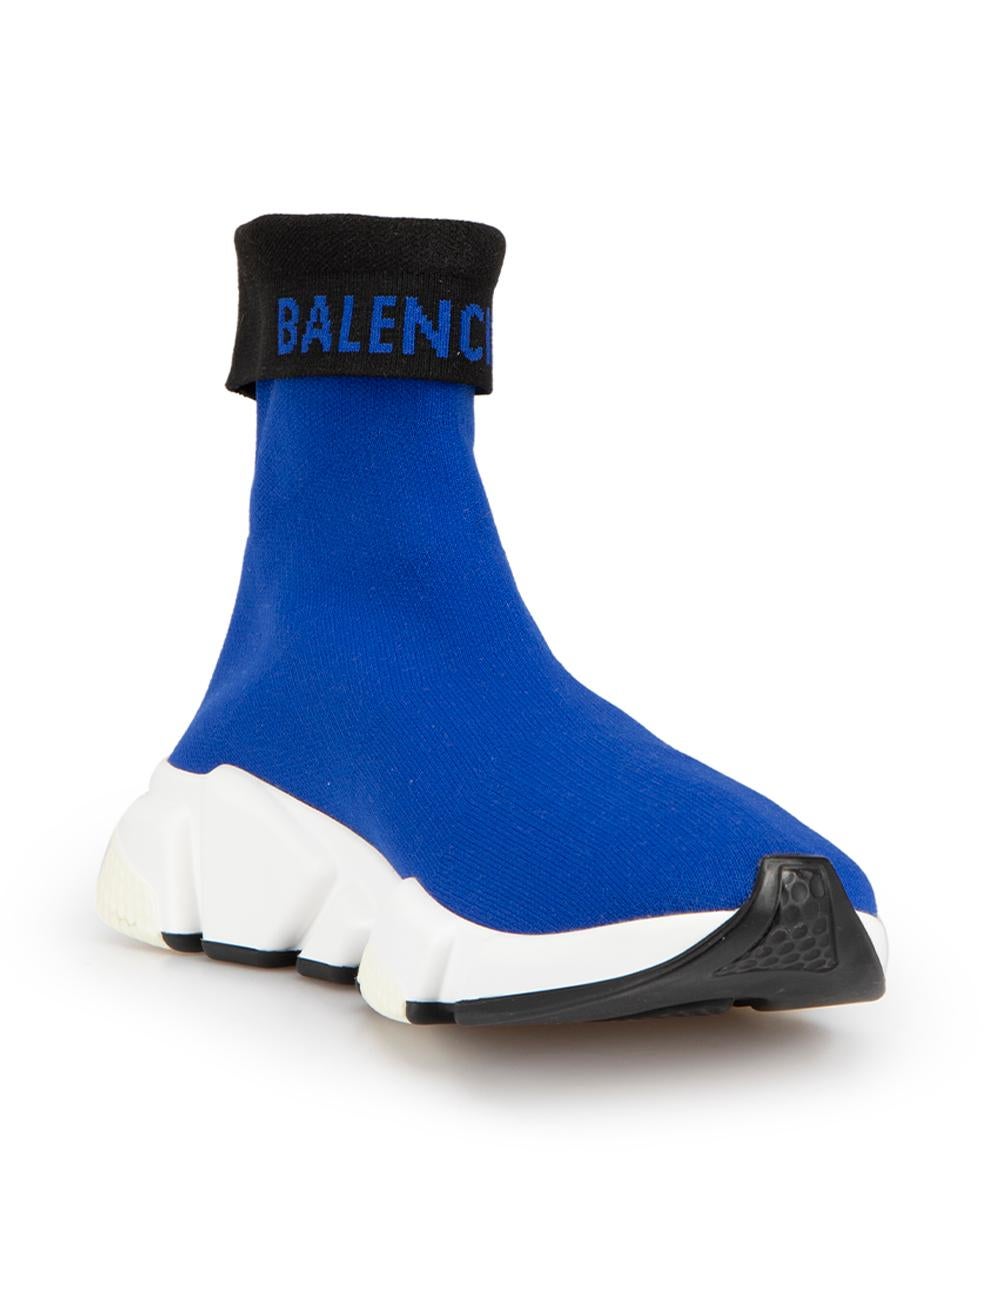 CONDITION is Never Worn. No visible wear to shoes is evident on this used Balenciaga designer resale item.



Details


Unisex

Blue

Synthetics

Sock trainers

Slip-on

Chunky white soles

Logo detail on the front



 

Made in